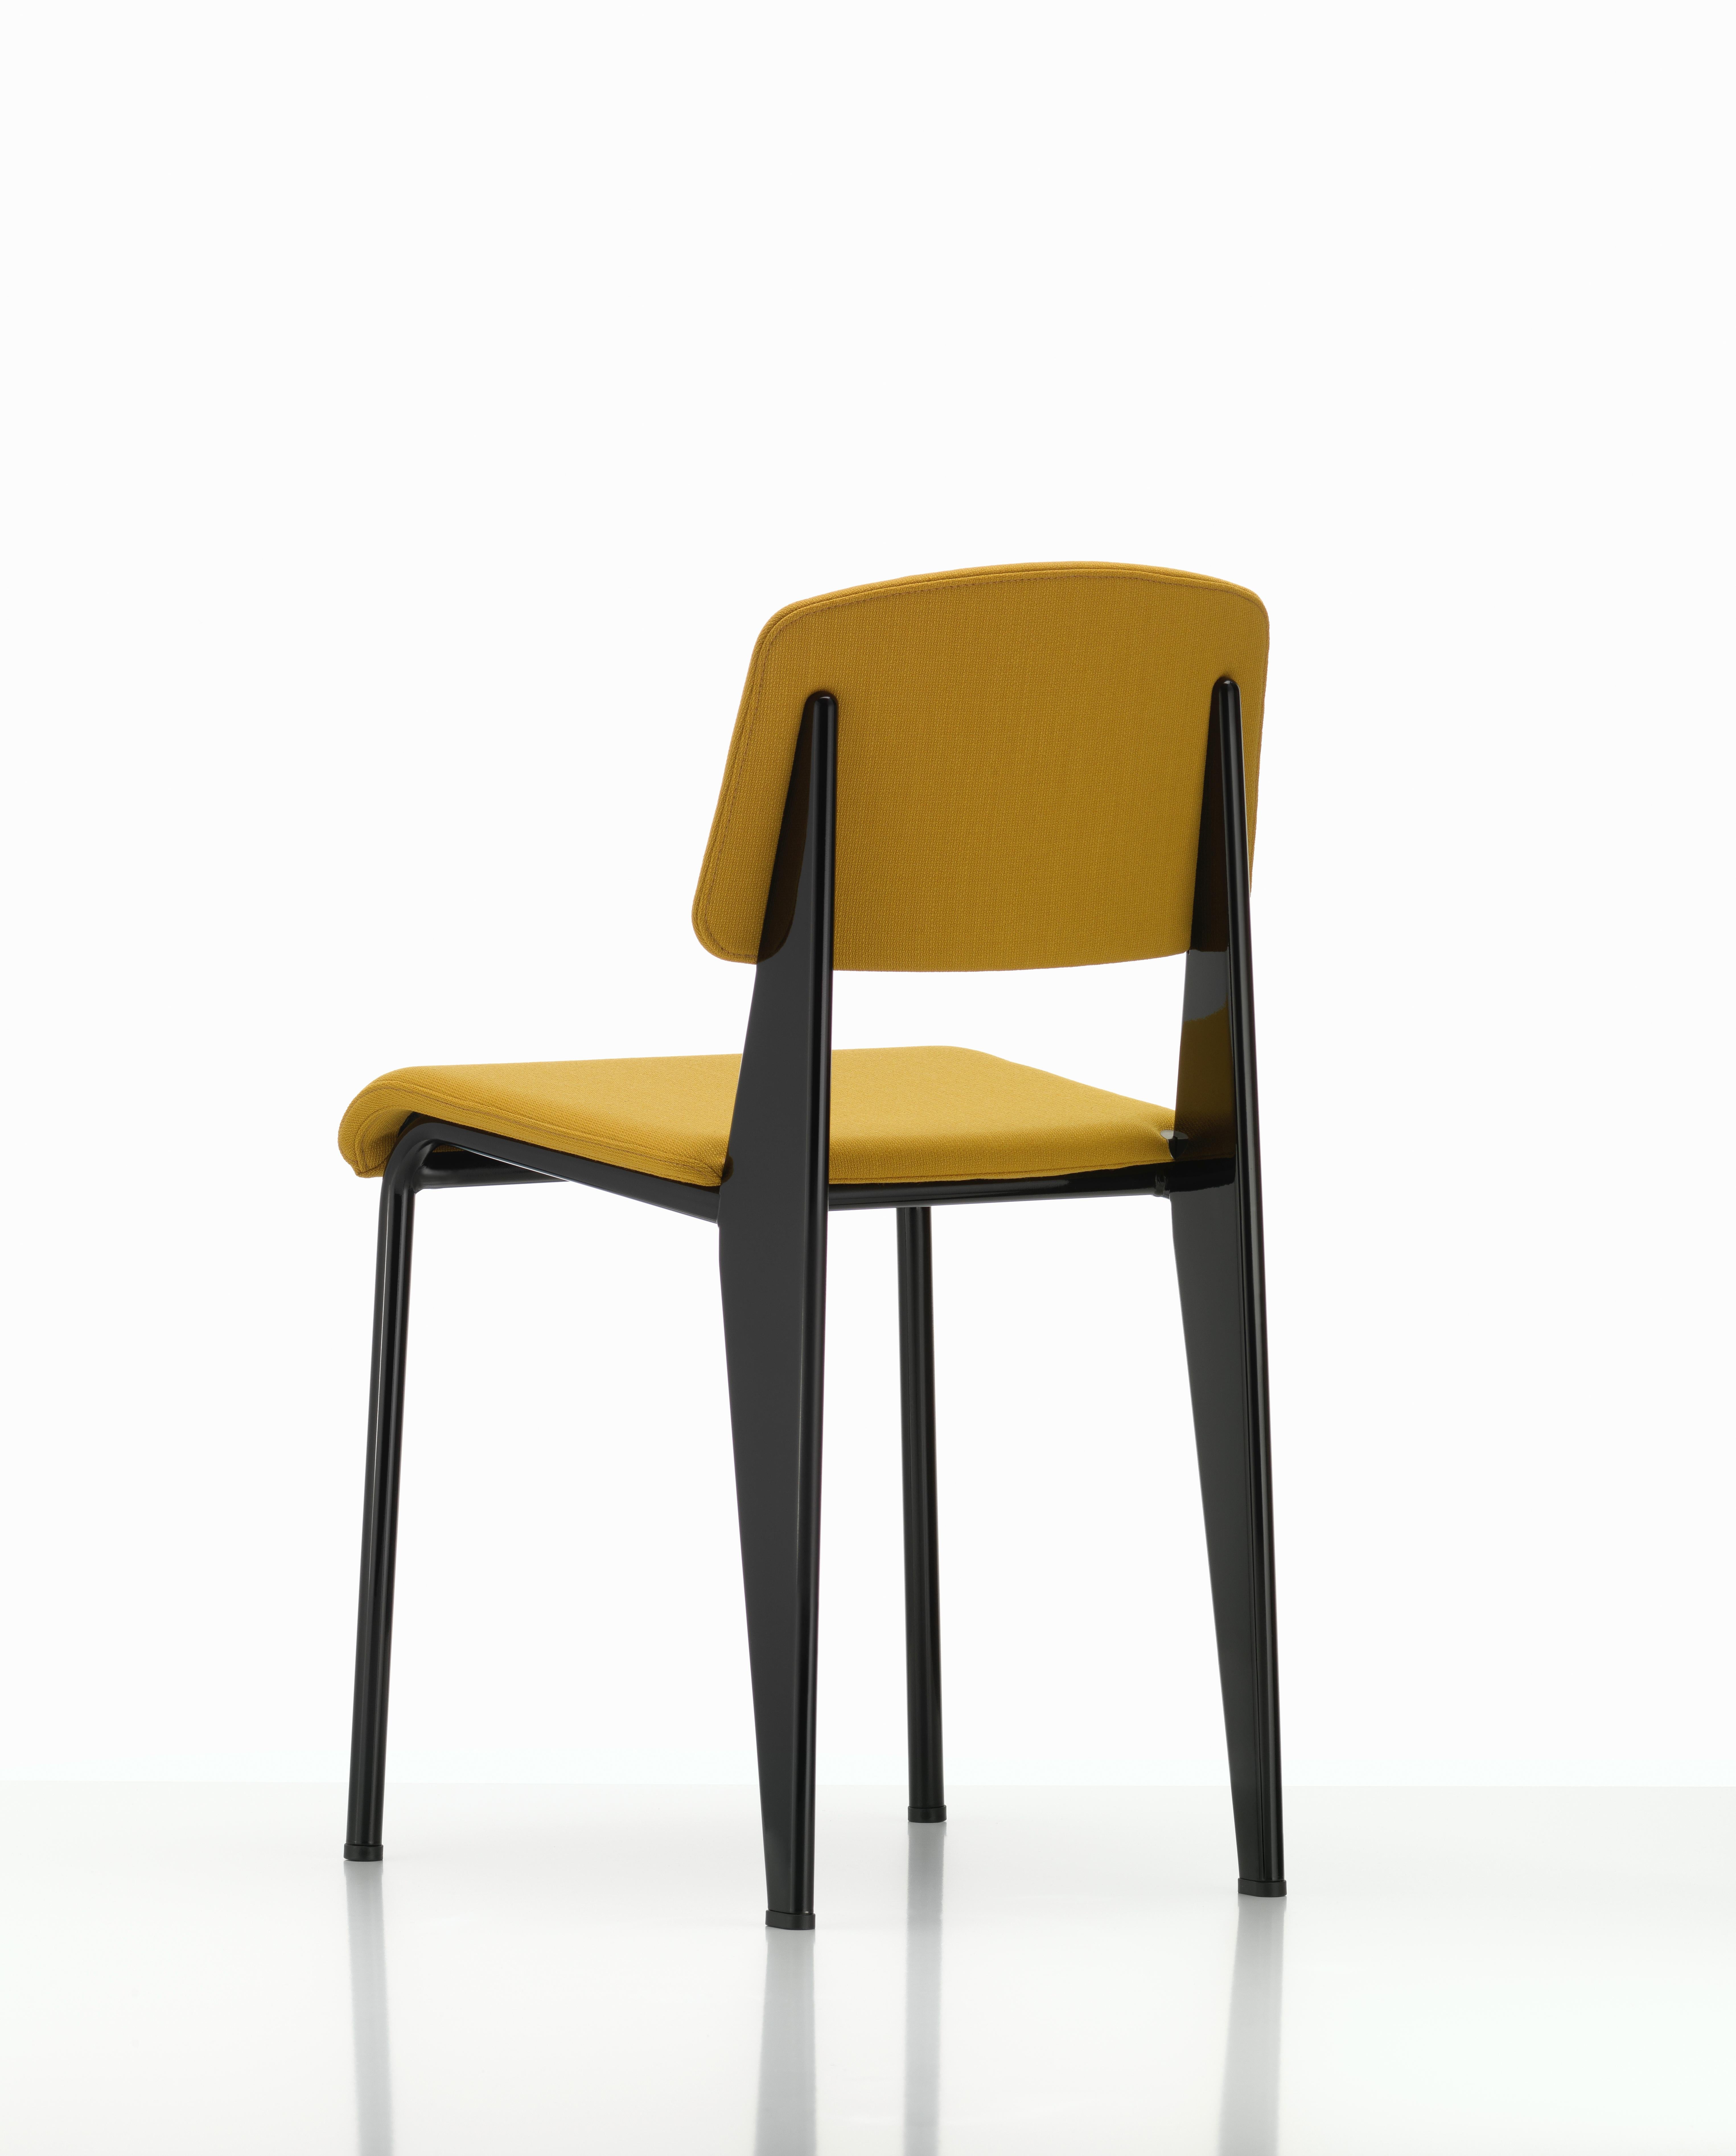 Swiss Vitra Standard SR Chair in Canola and Deep Black by Jean Prouvé For Sale